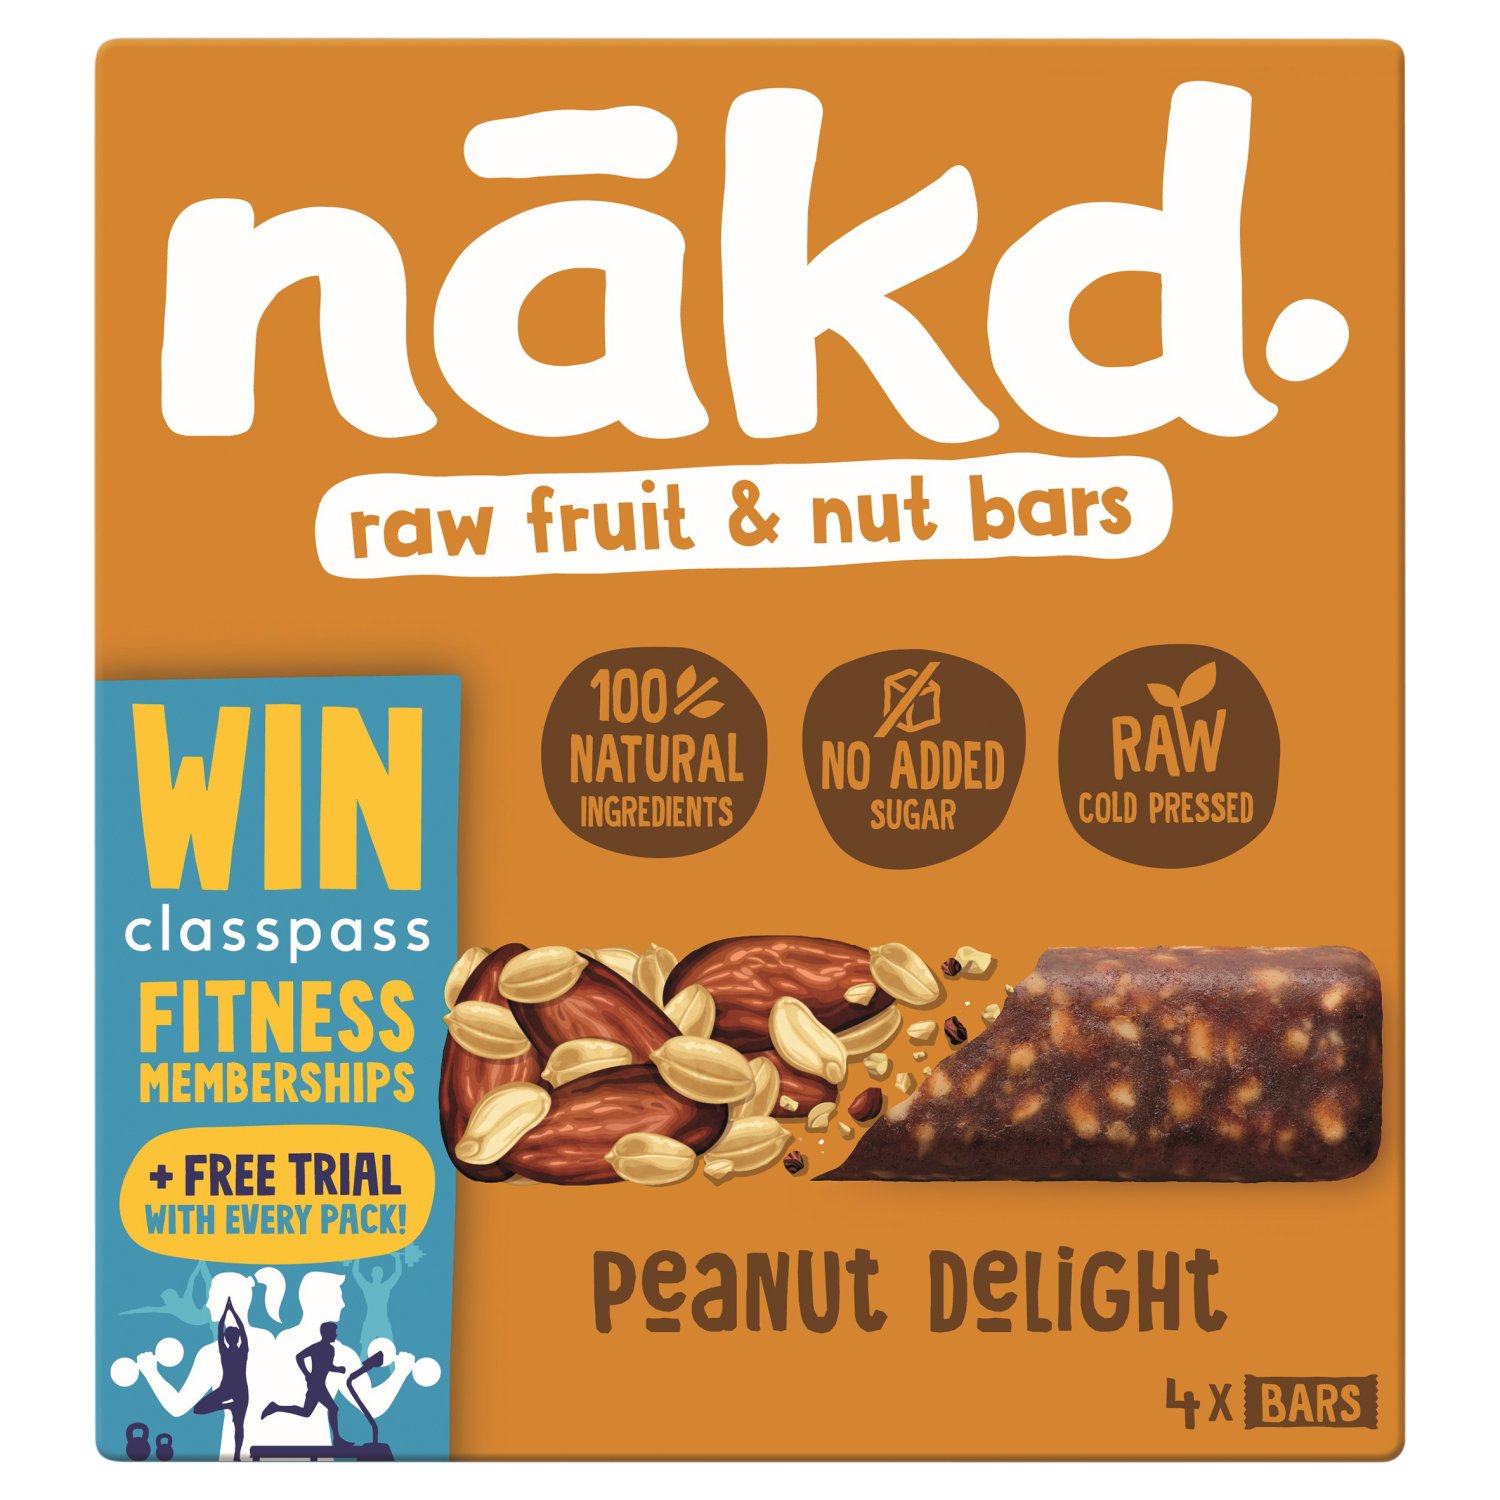 Scrumptiously satisfying nakd. Peanut Delight bars are chock full of 100% natural ingredients including delicious dates and protein-packed peanuts. This little beauty is perfect as a pick-me up between meals or just when you feel like treating yourself. Oh, and they're free from gluten and dairy. Chewy, peanutty perfection, mmmmm.